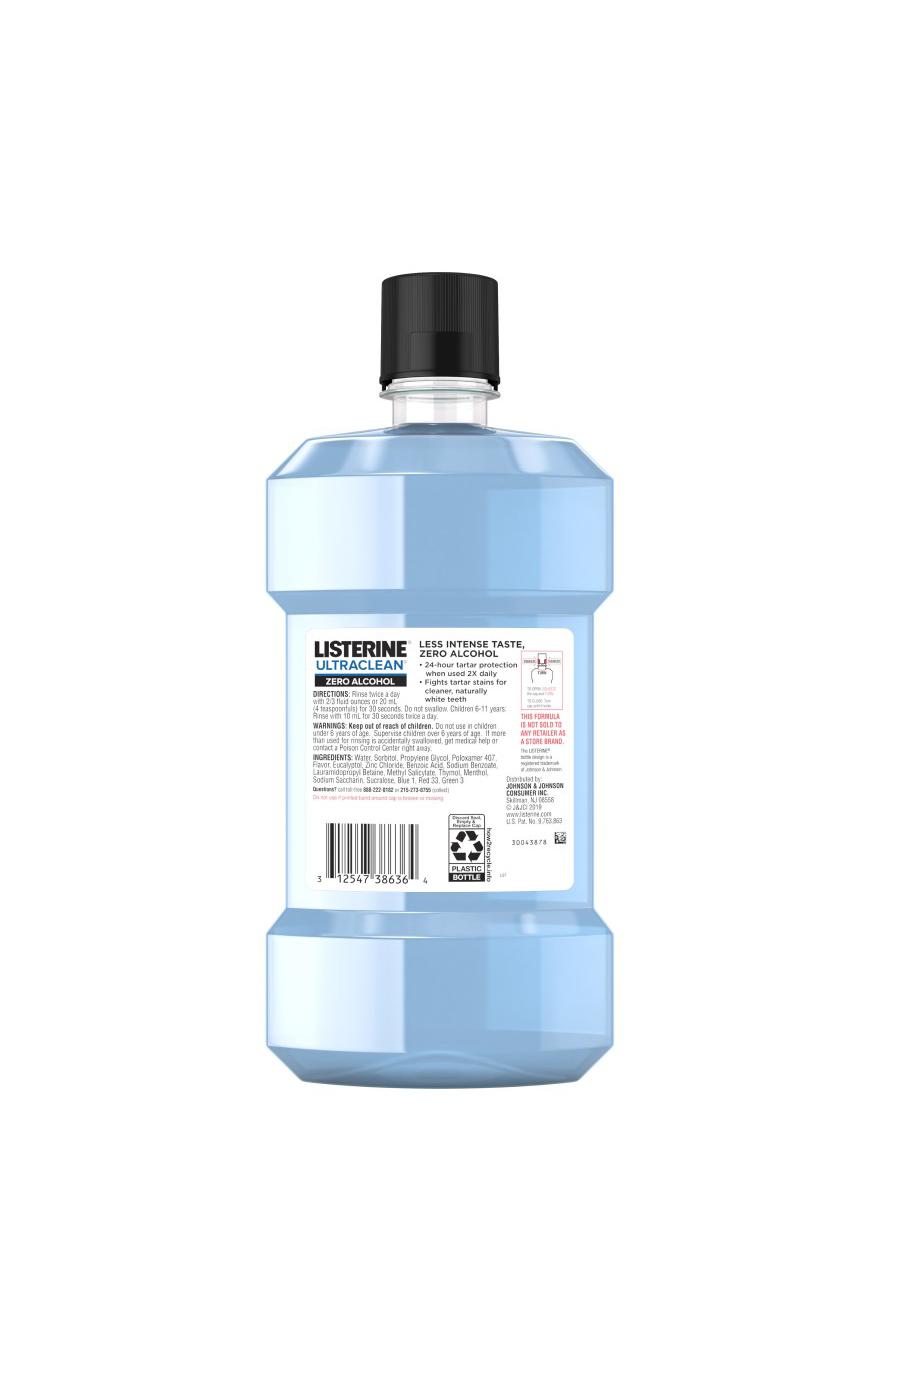 Listerine Ultraclean Zero Alcohol Mouthwash - Arctic Mint; image 3 of 5